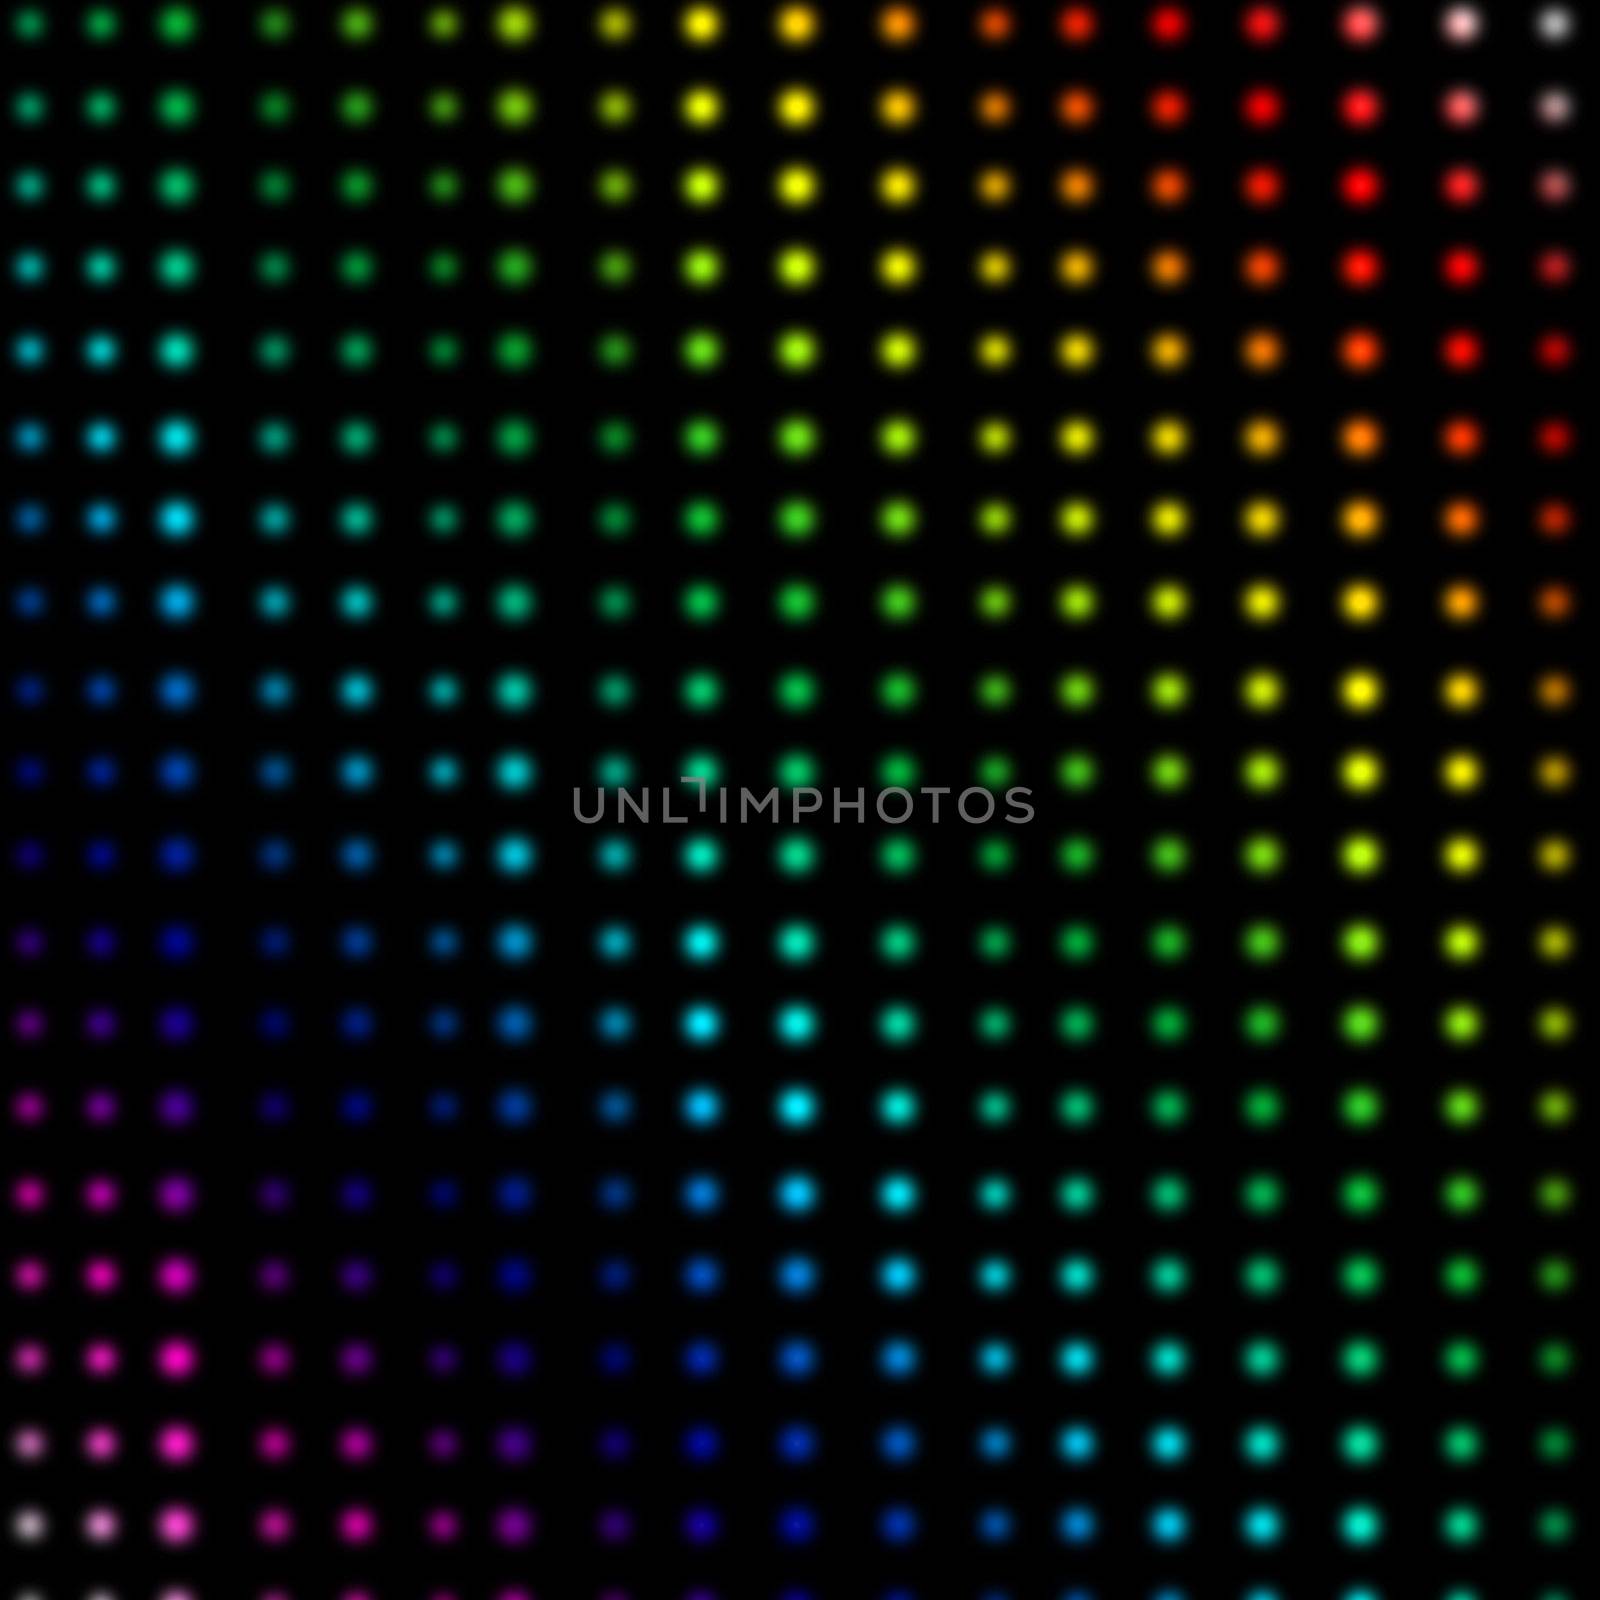 Multicolored dots forming lines against a black background